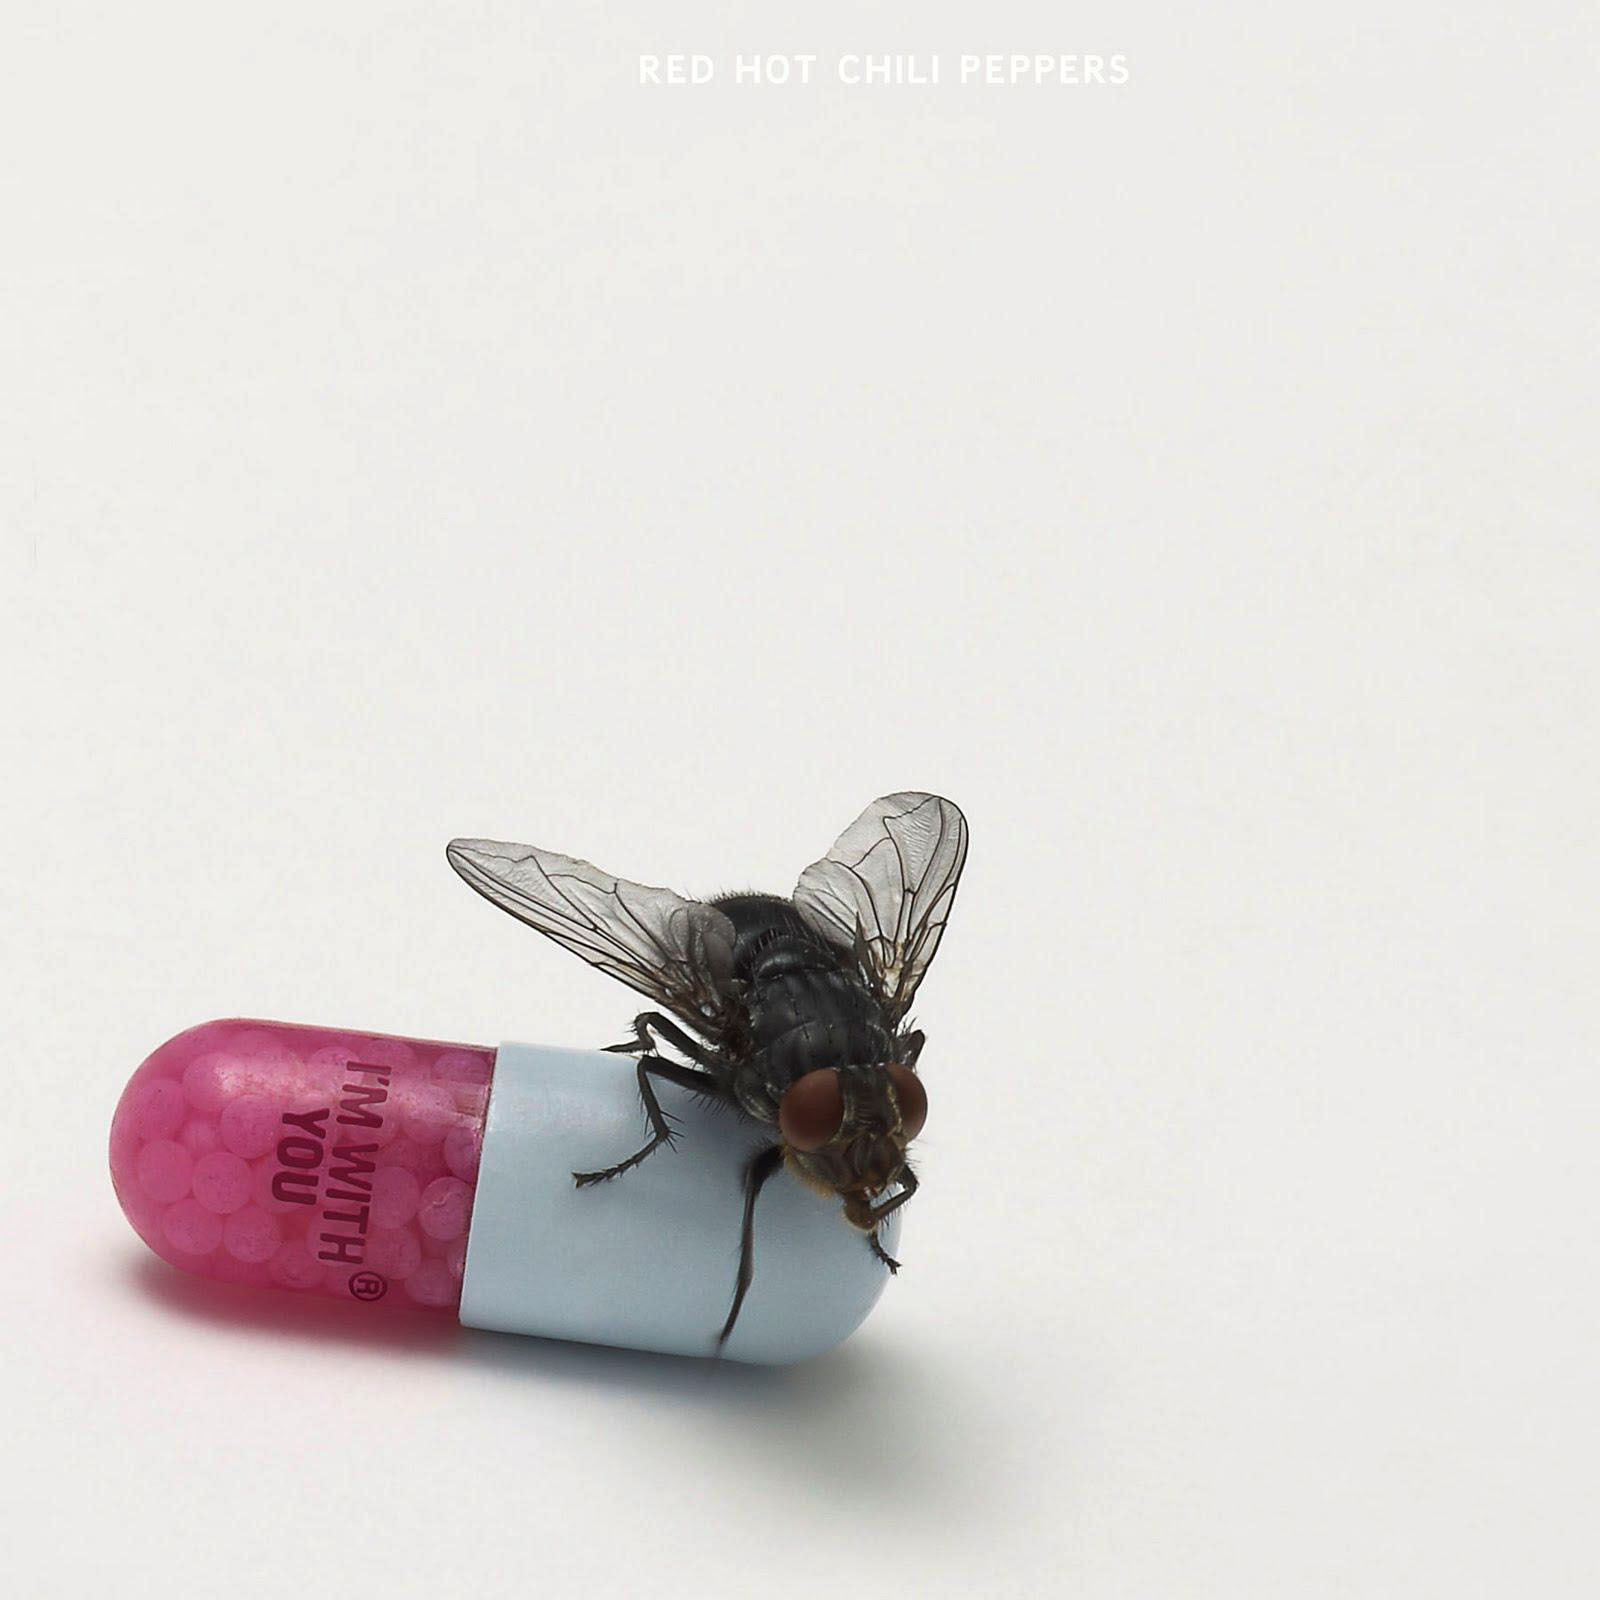 RED HOT CHILI PEPPERS (レッド・ホット・チリ・ペッパーズ) 10thアルバム『I'M WITH YOU (アイム・ウィズ・ユー)』高画質ジャケット画像